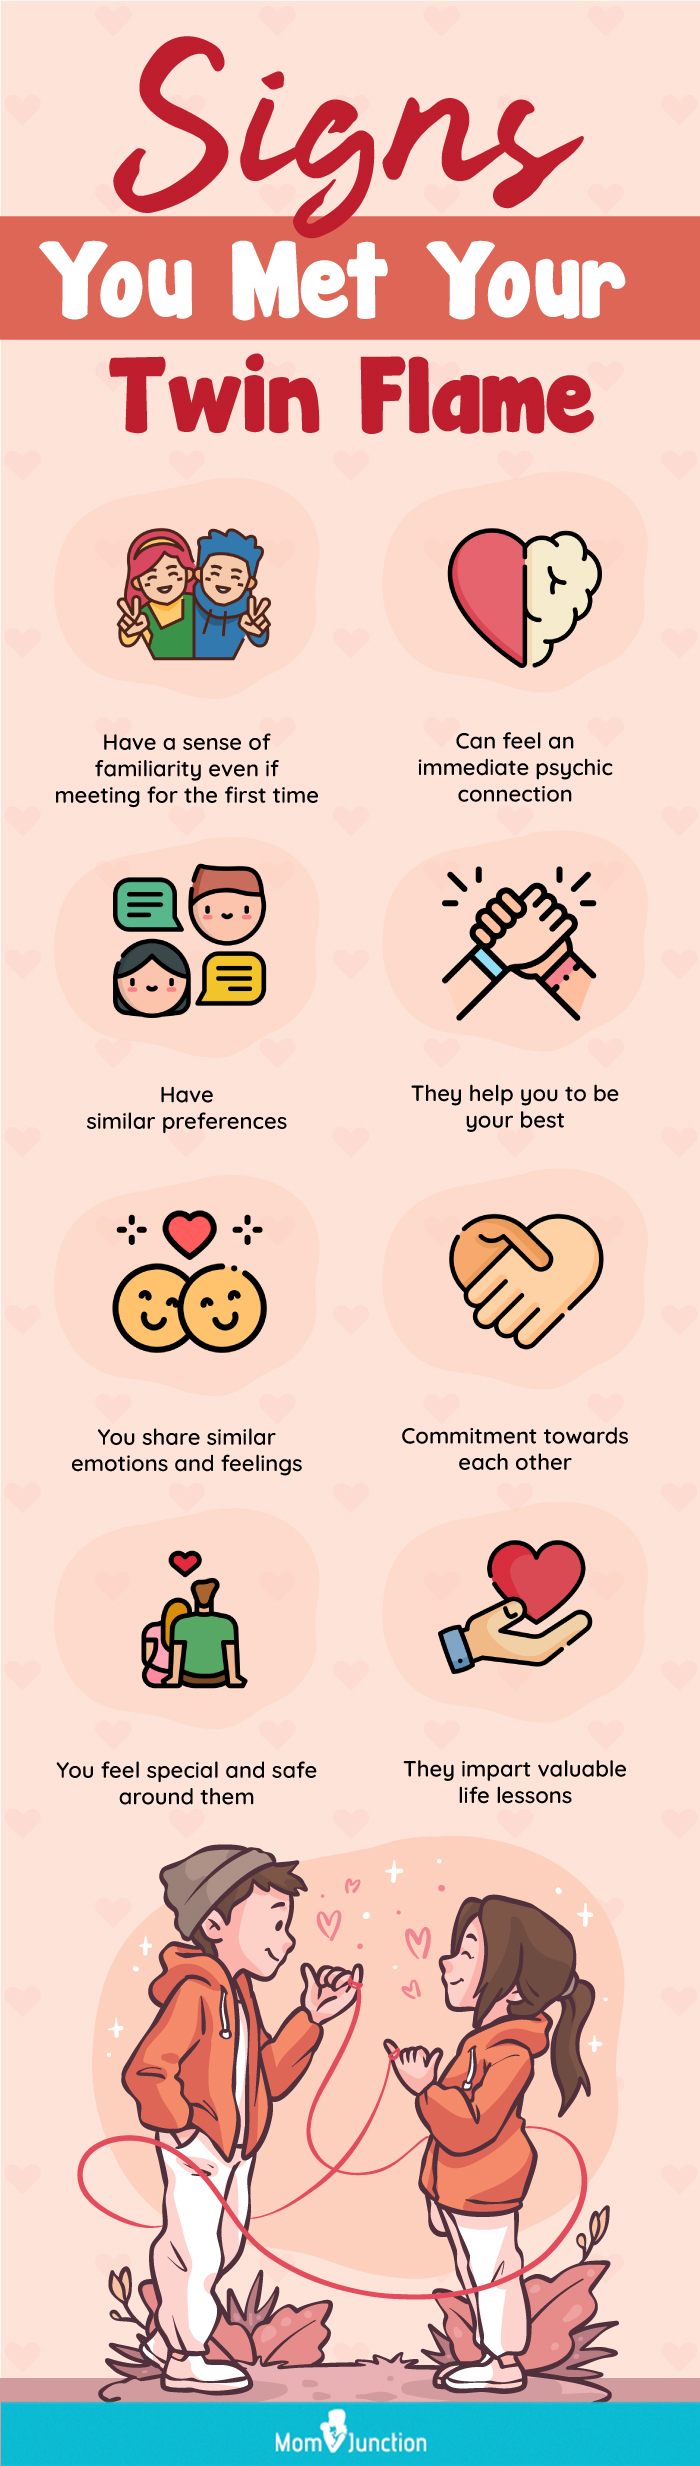 signs you met your twin flame (infographic)